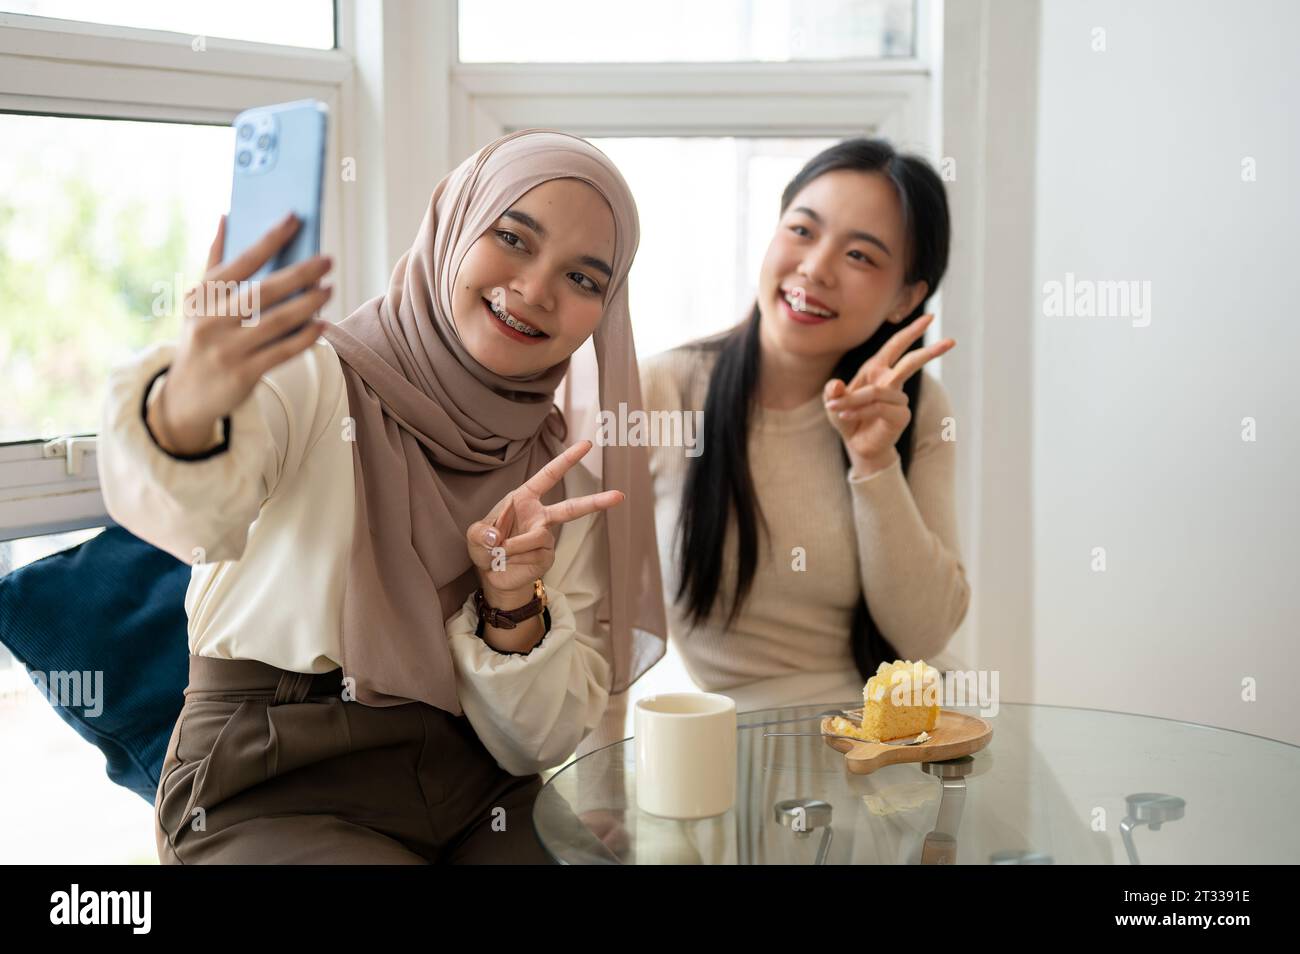 A beautiful and happy young Asian-Muslim woman is taking selfies with her friend while enjoying in a cafe. Stock Photo